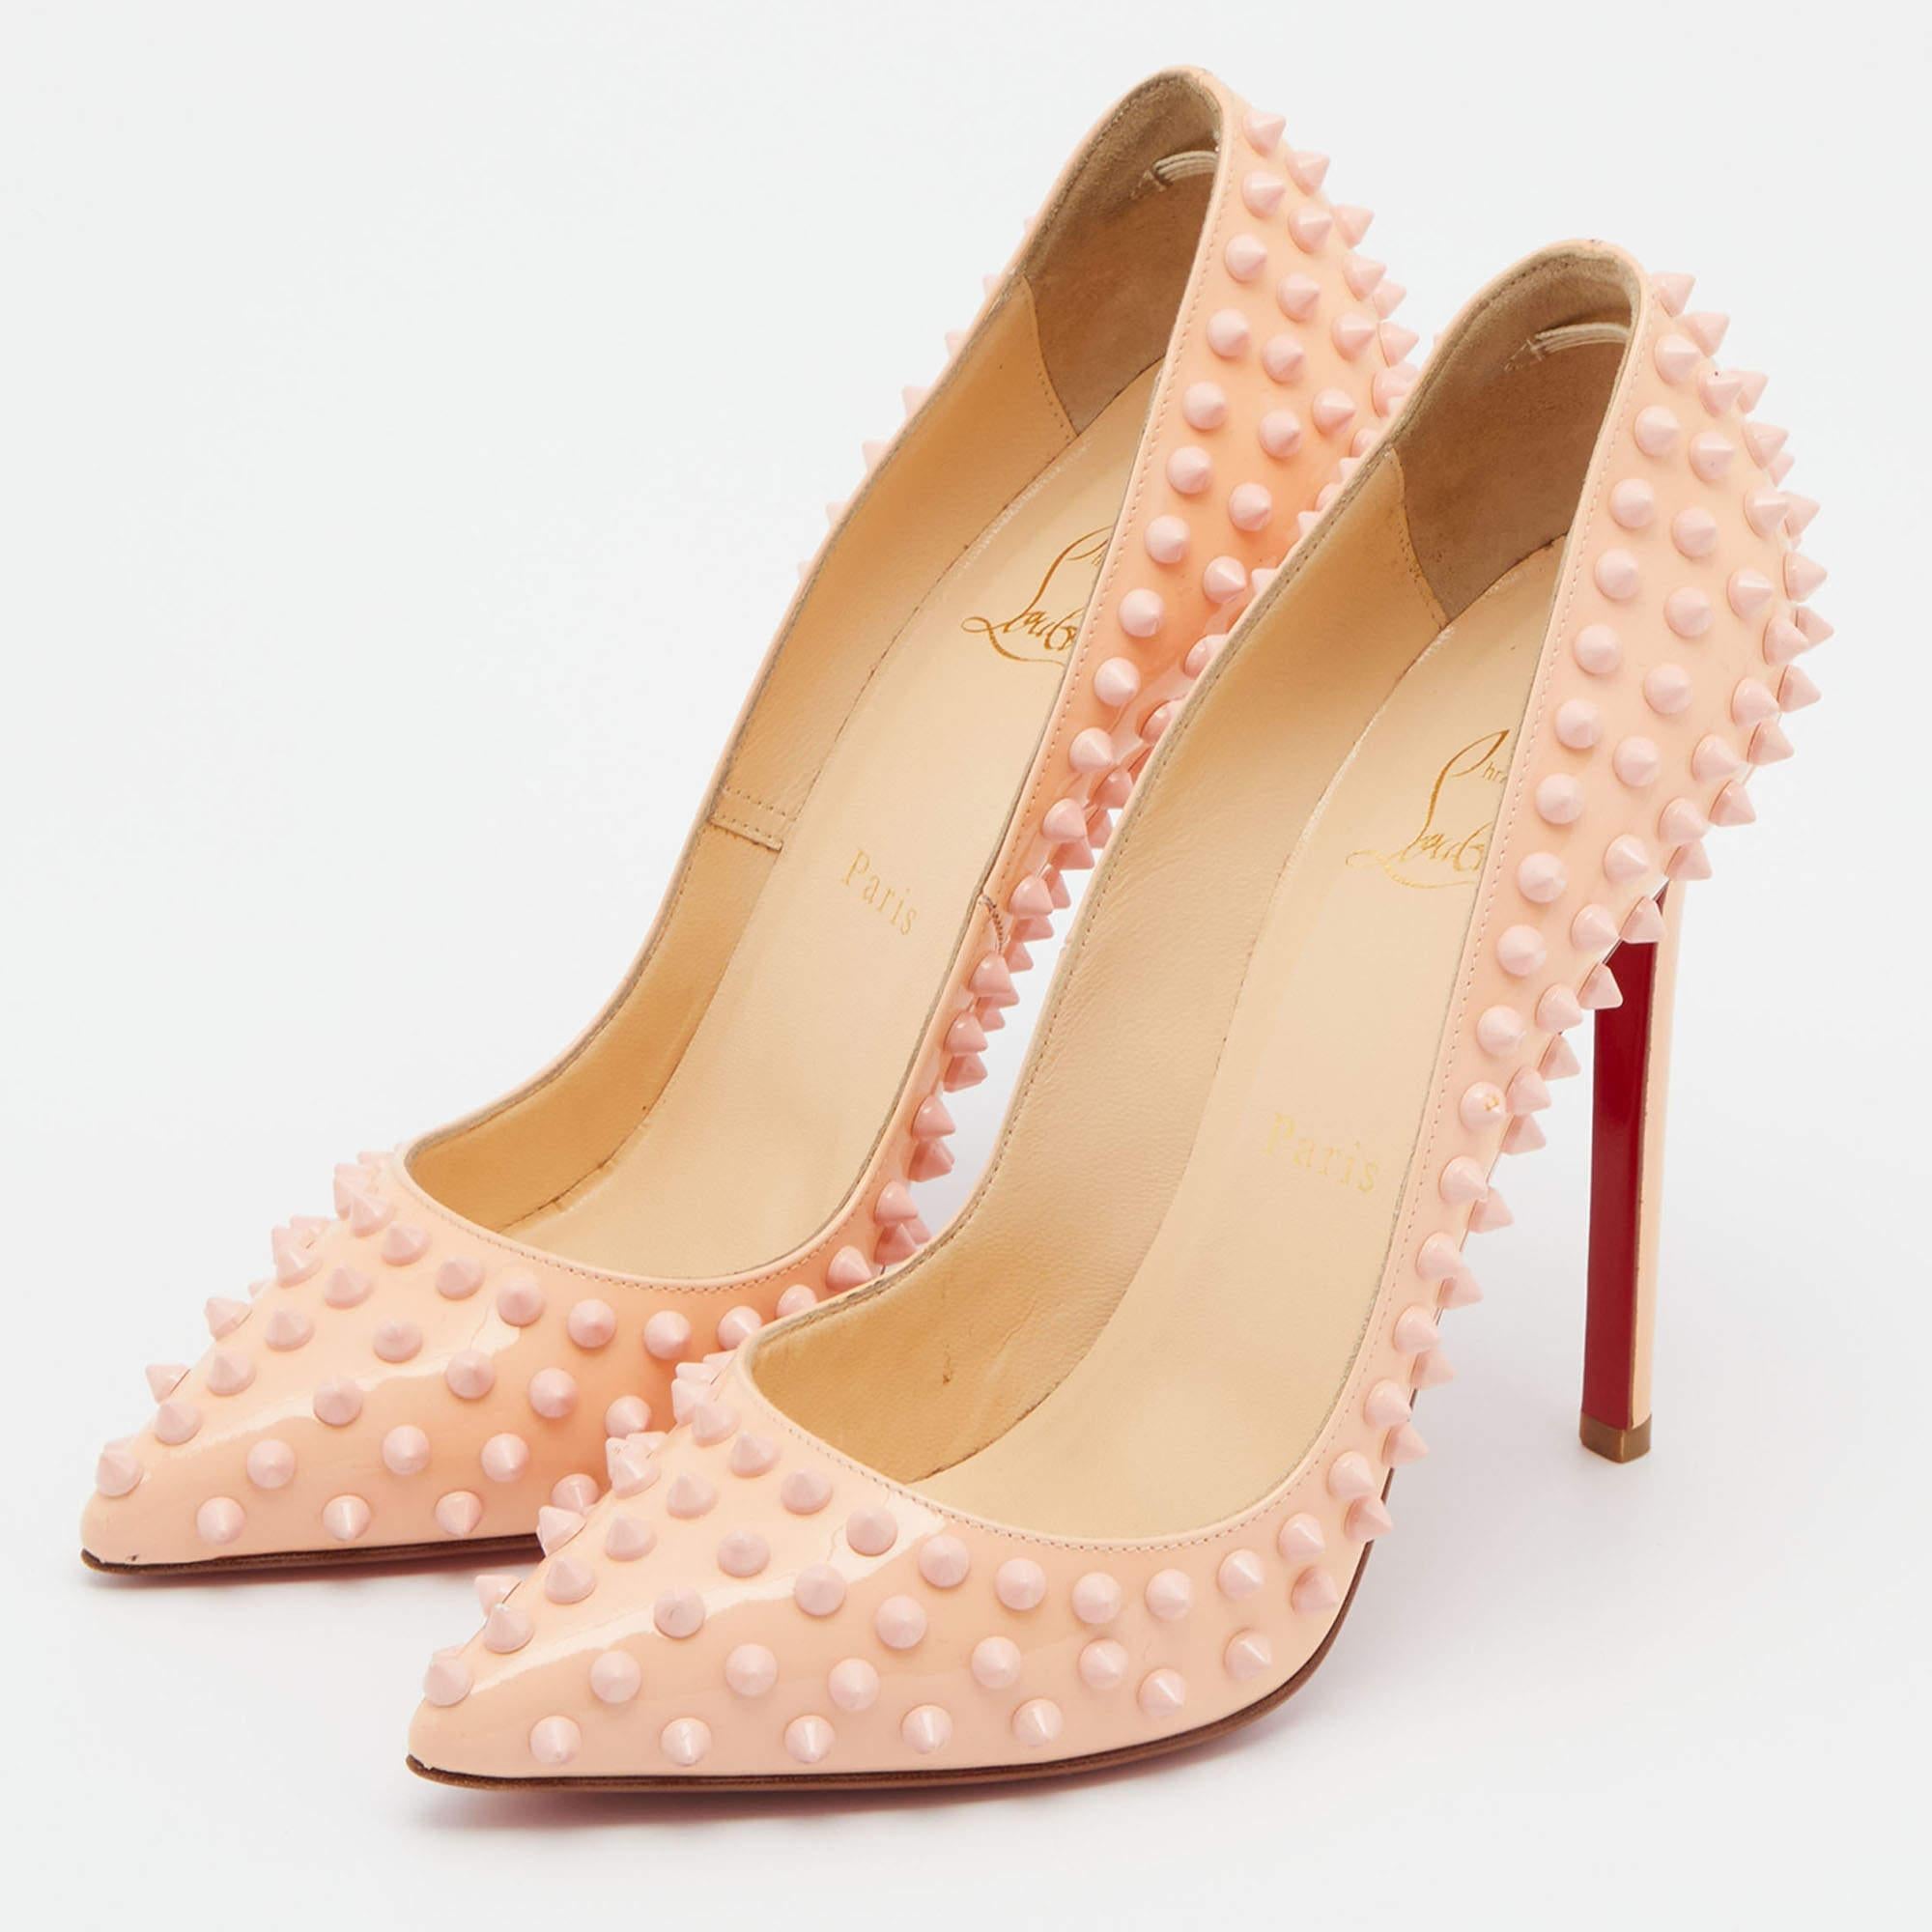 Christian Louboutin Peach Patent Leather Pigalle Spikes Pointed Toe Pumps Size 3 In Good Condition For Sale In Dubai, Al Qouz 2